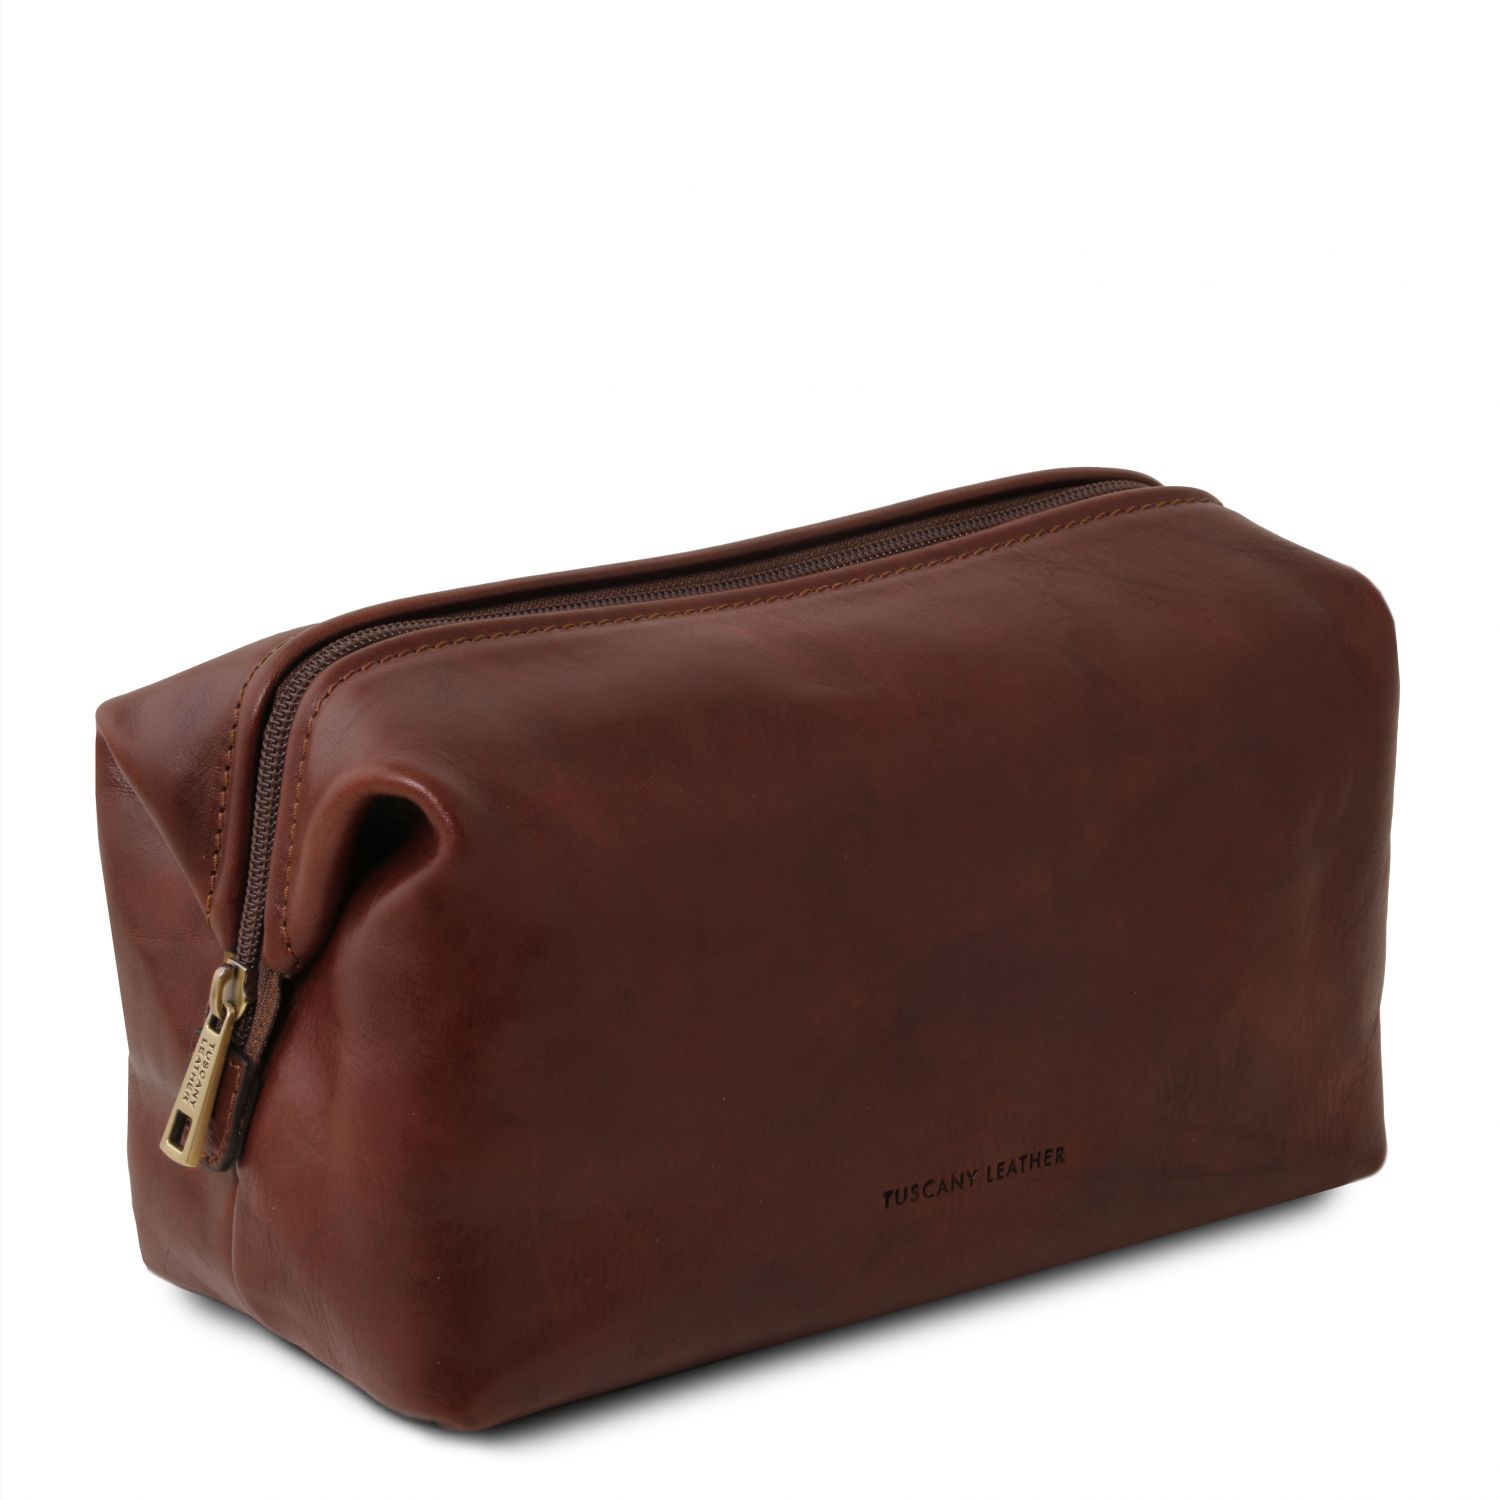 Leather Toiletry Bag - Large Size - Smarty - Domini Leather